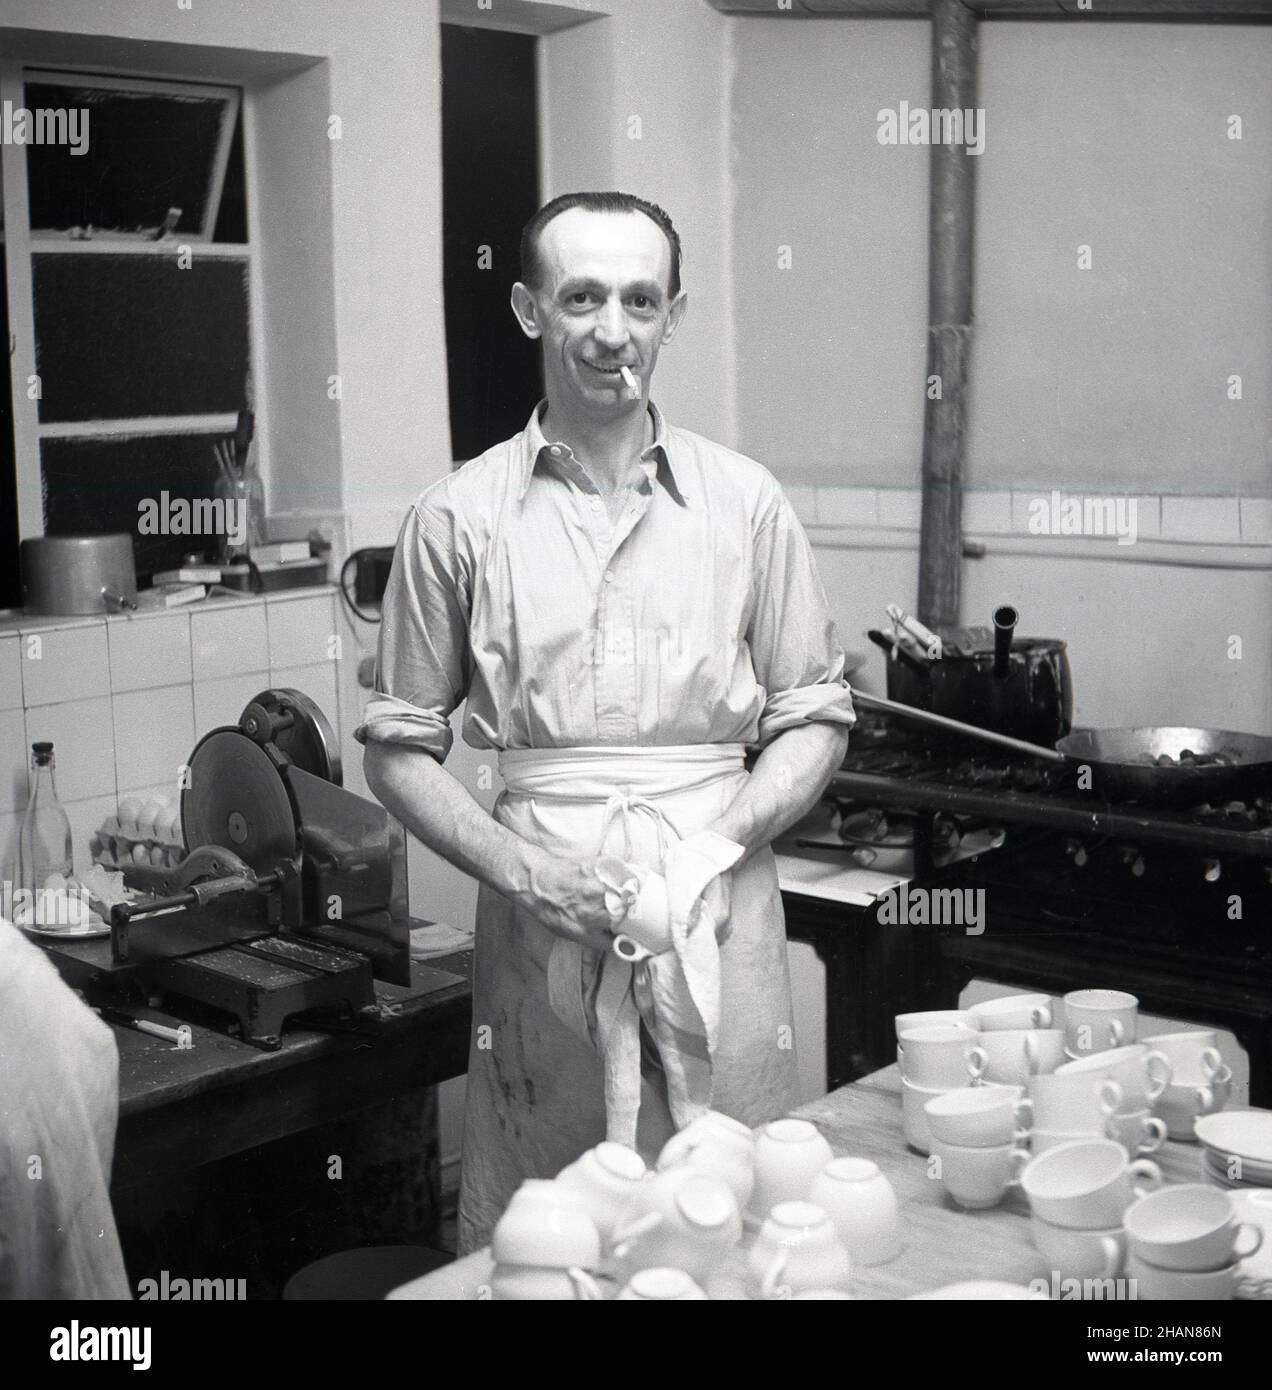 1951, historical, a male cafe owner in his kitchen, wearing a waist or half apron, cigarette in mouth, wiping the cups dry with a tea towel, London, England, UK. Stock Photo